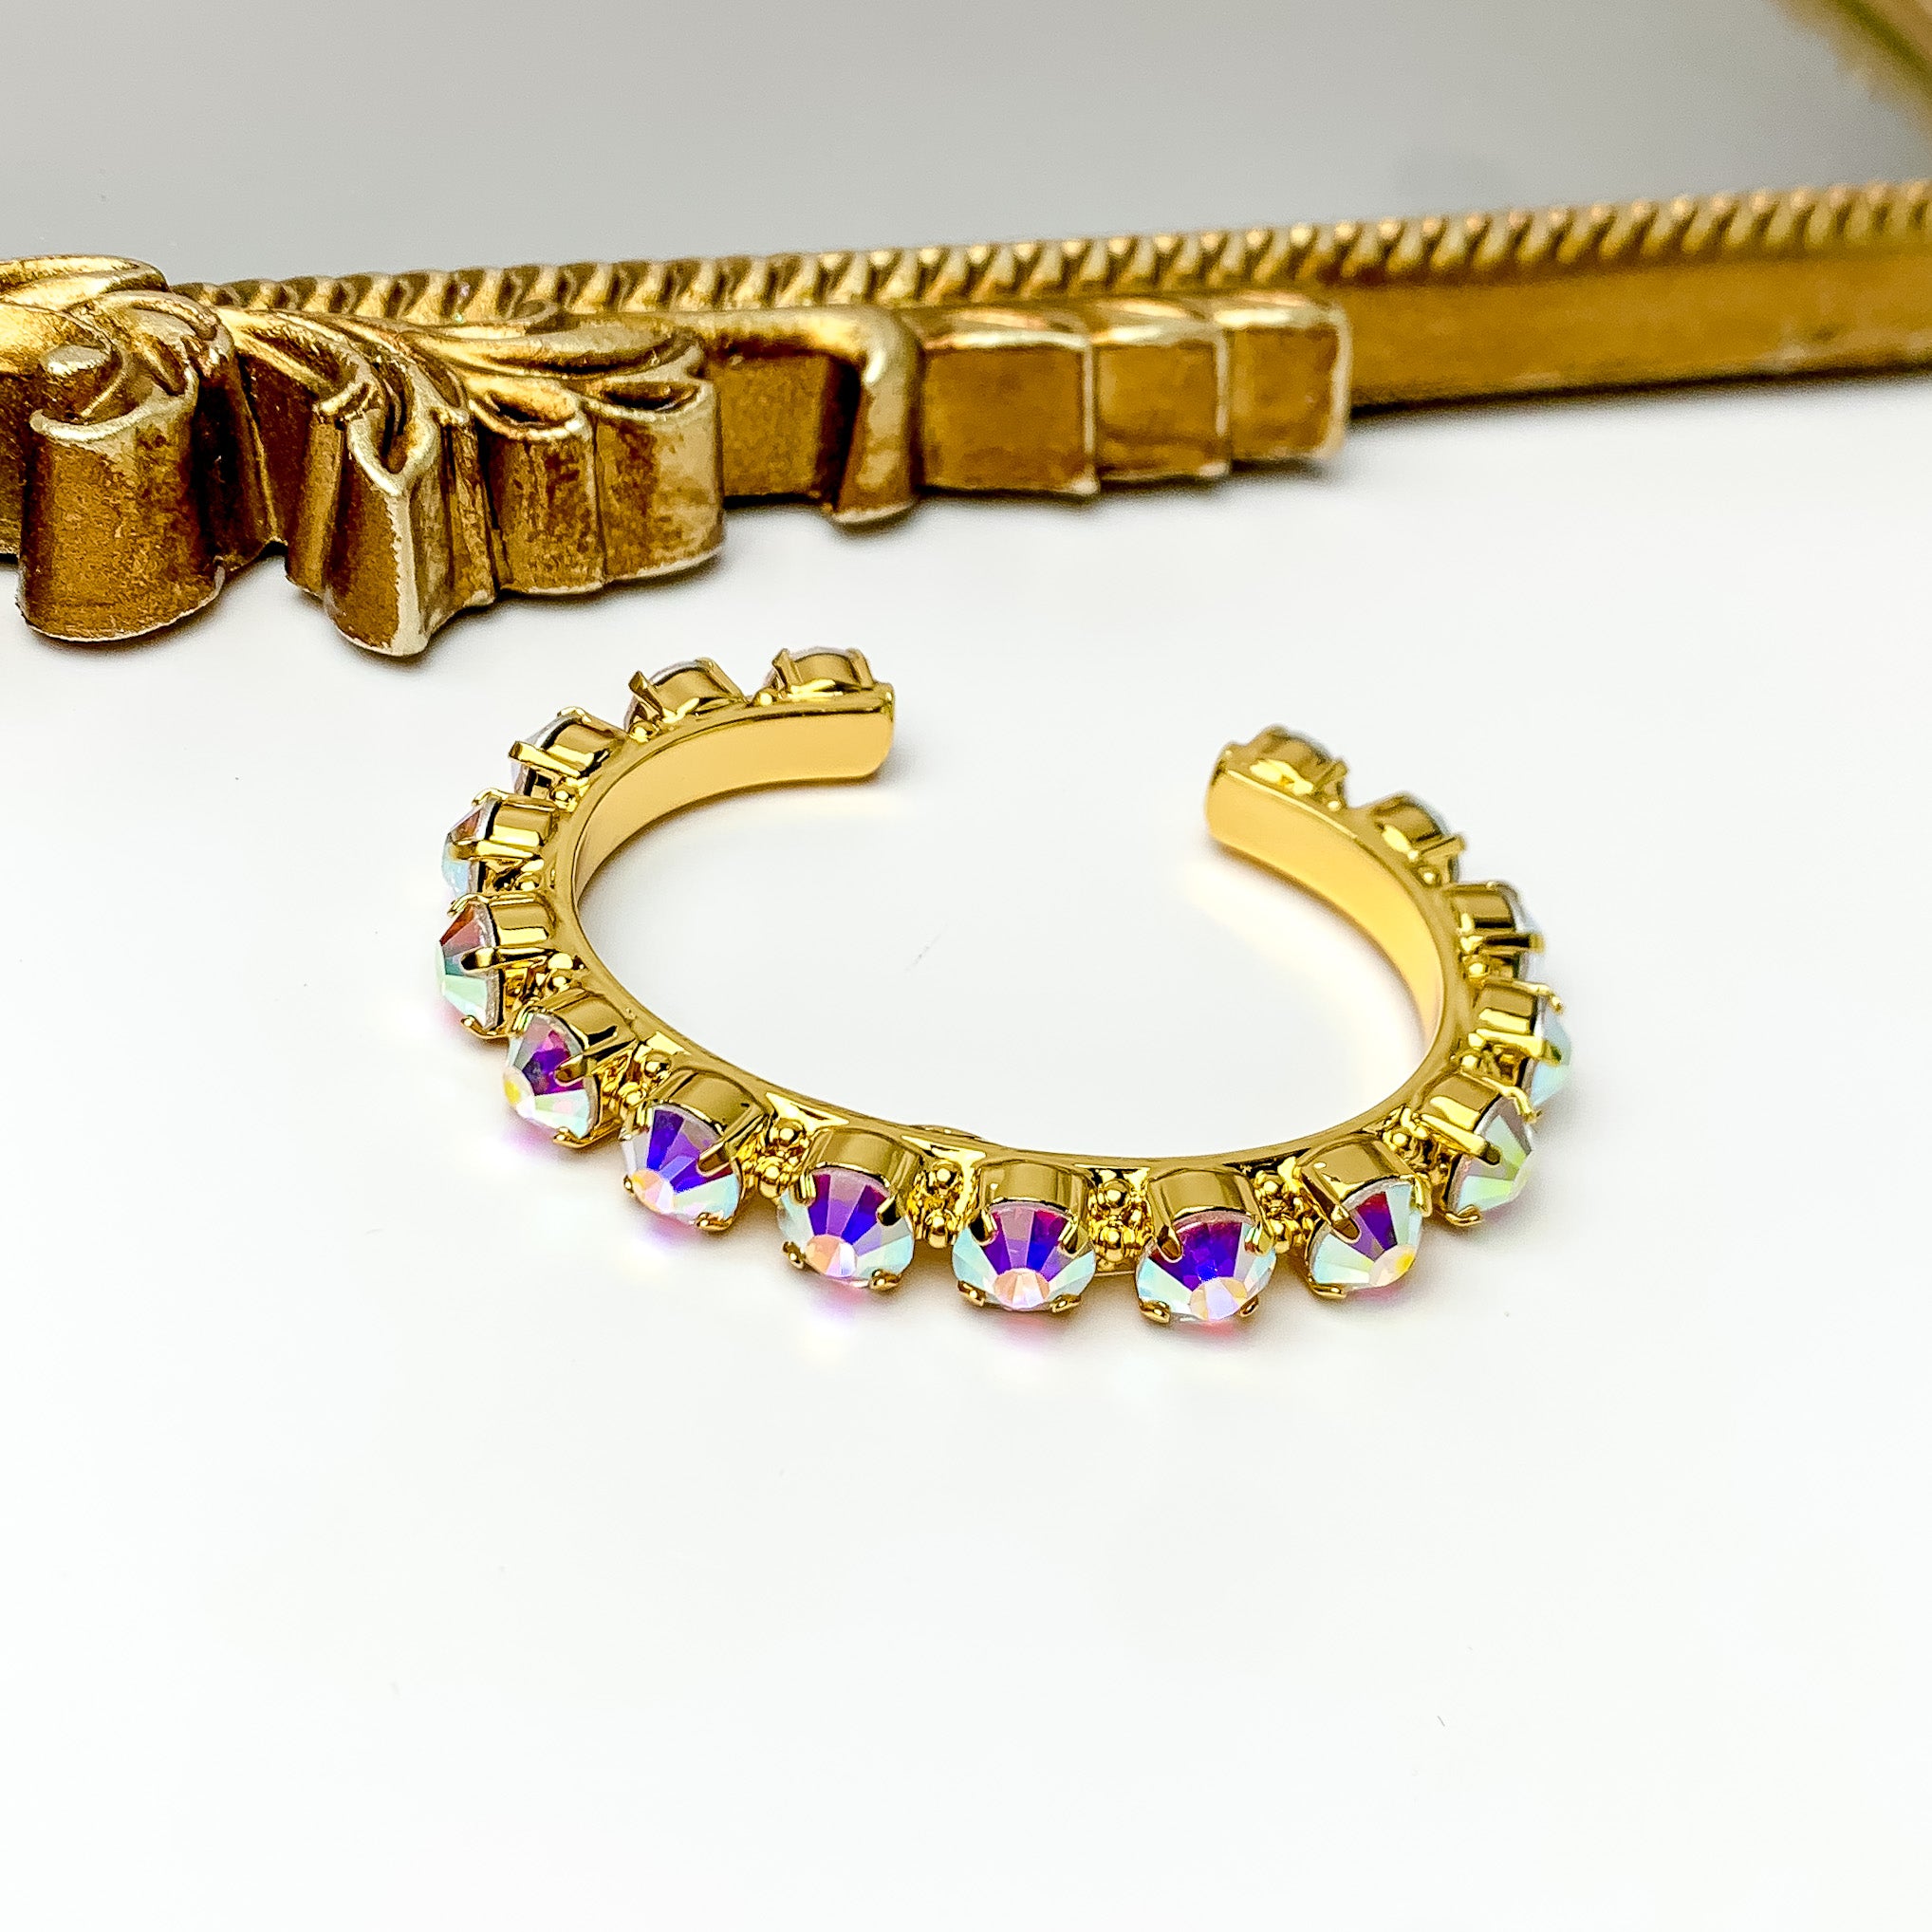 Image of Sorrelli | Riveting Romance Cuff Bracelet in Bright Gold Tone and Aurora Borealis Crystals